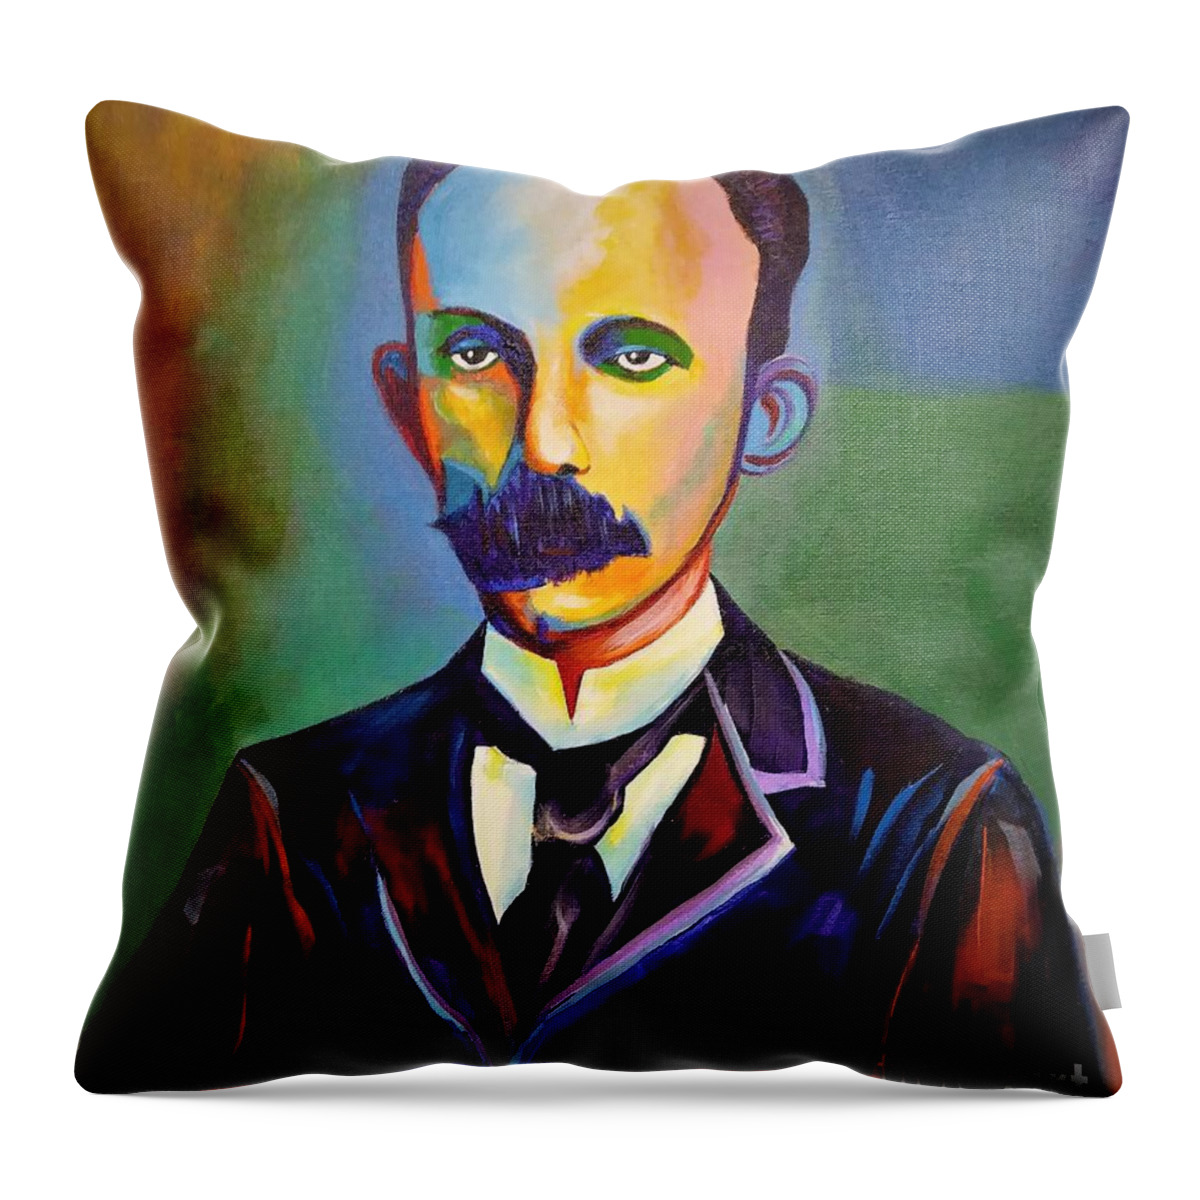 Cuban Art Throw Pillow featuring the painting J.Marti by Jose Manuel Abraham